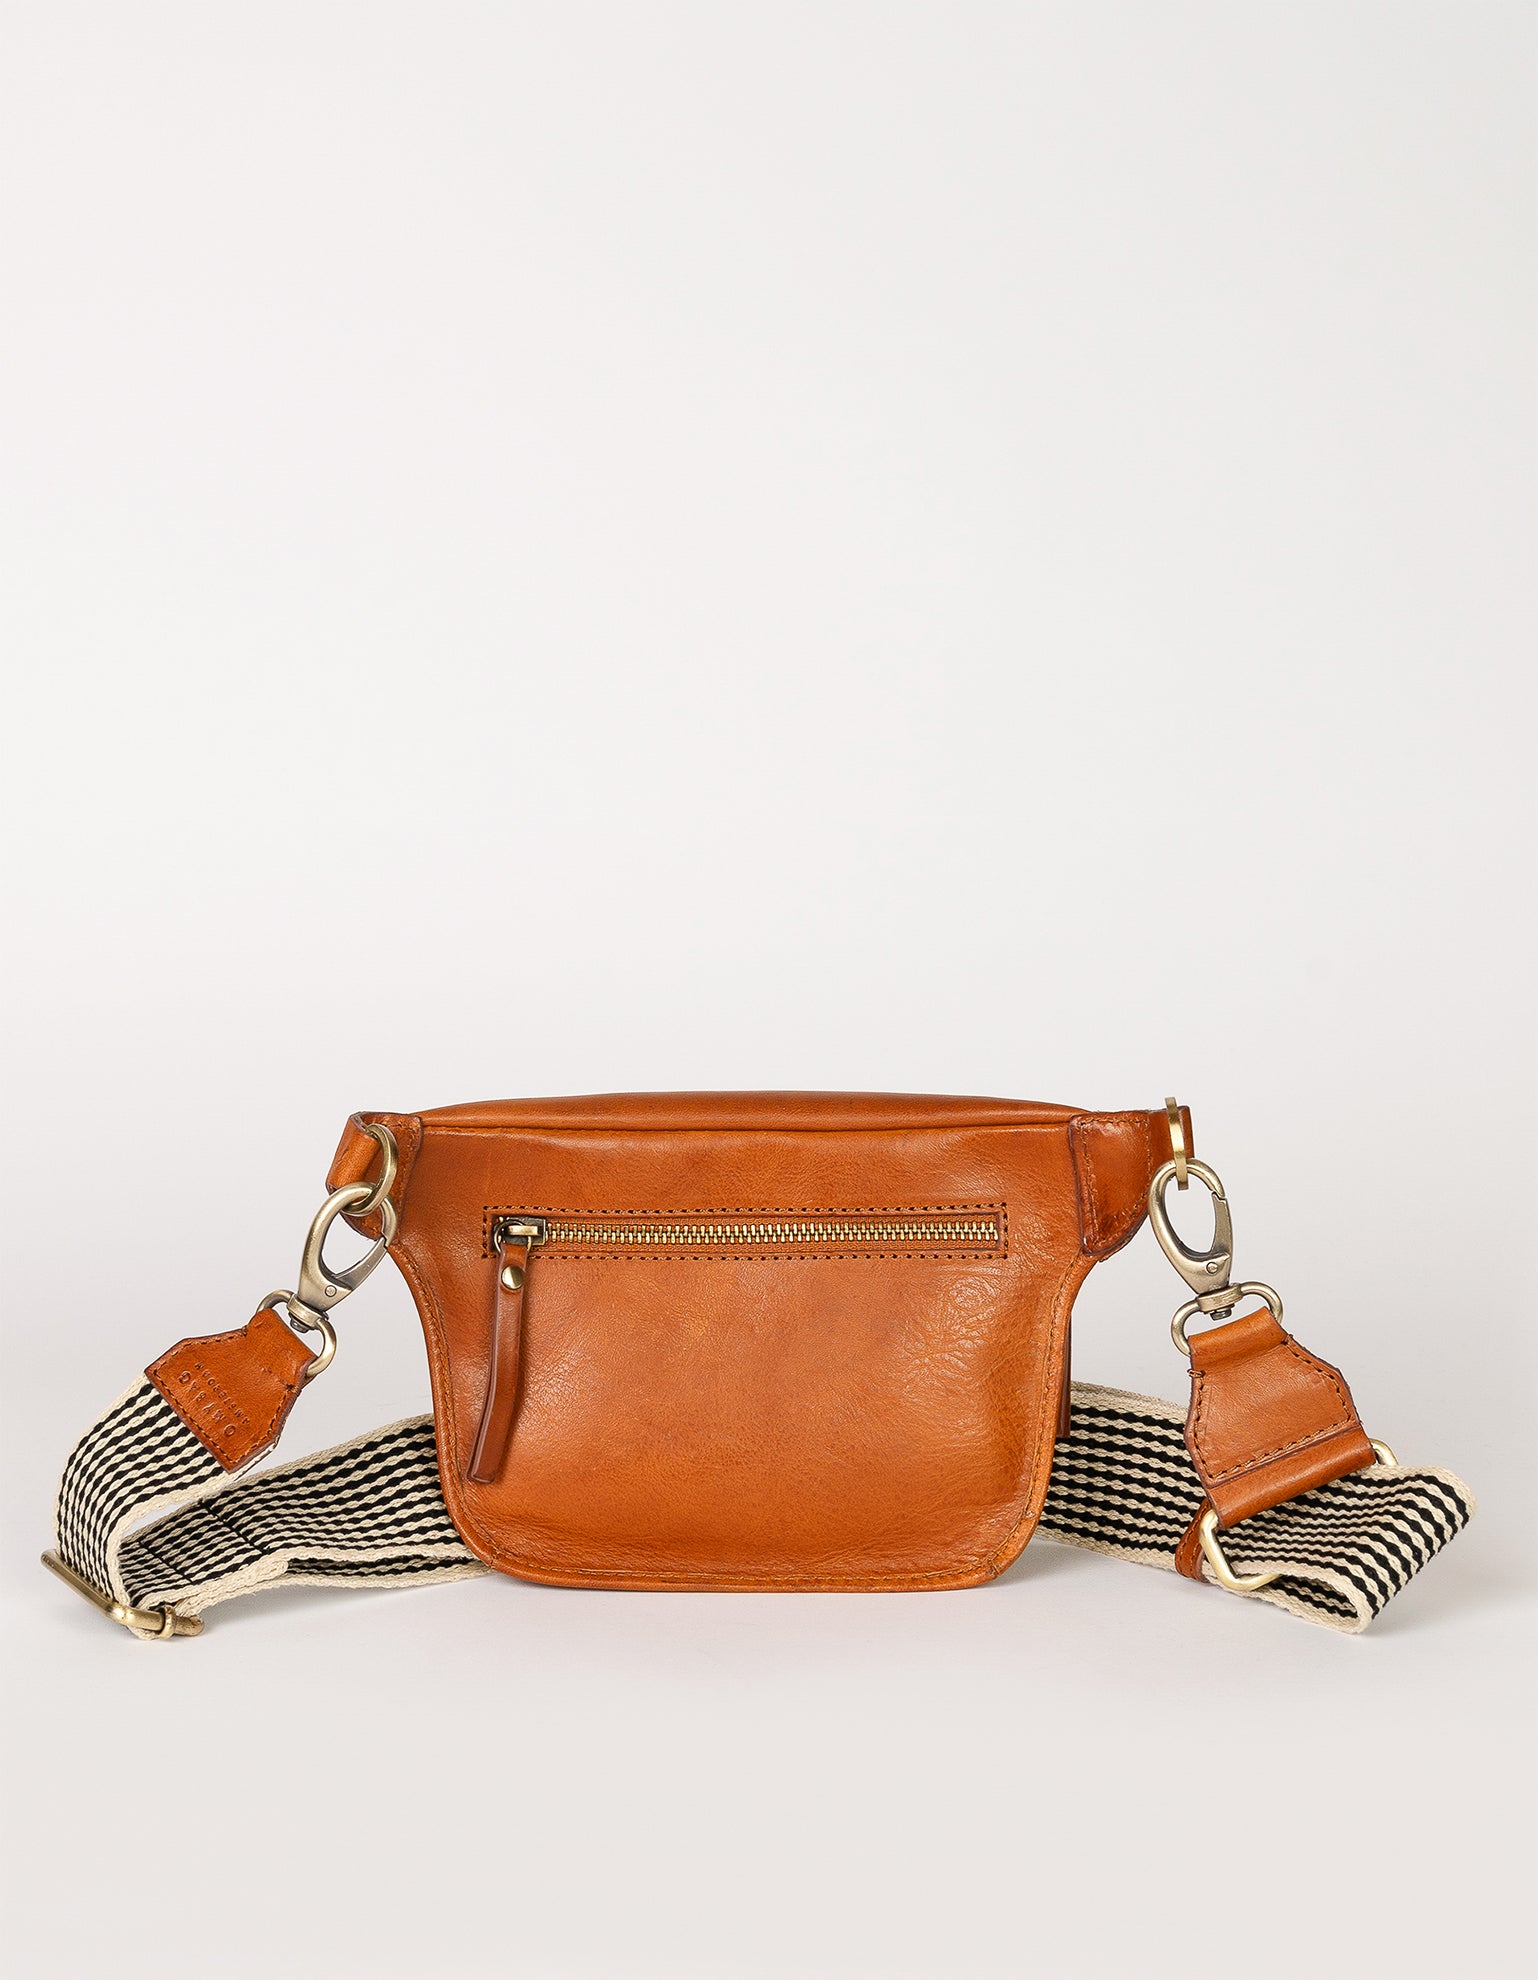 Cognac Leather womens fanny pack. Square shape with an adjustable strap. Back product image